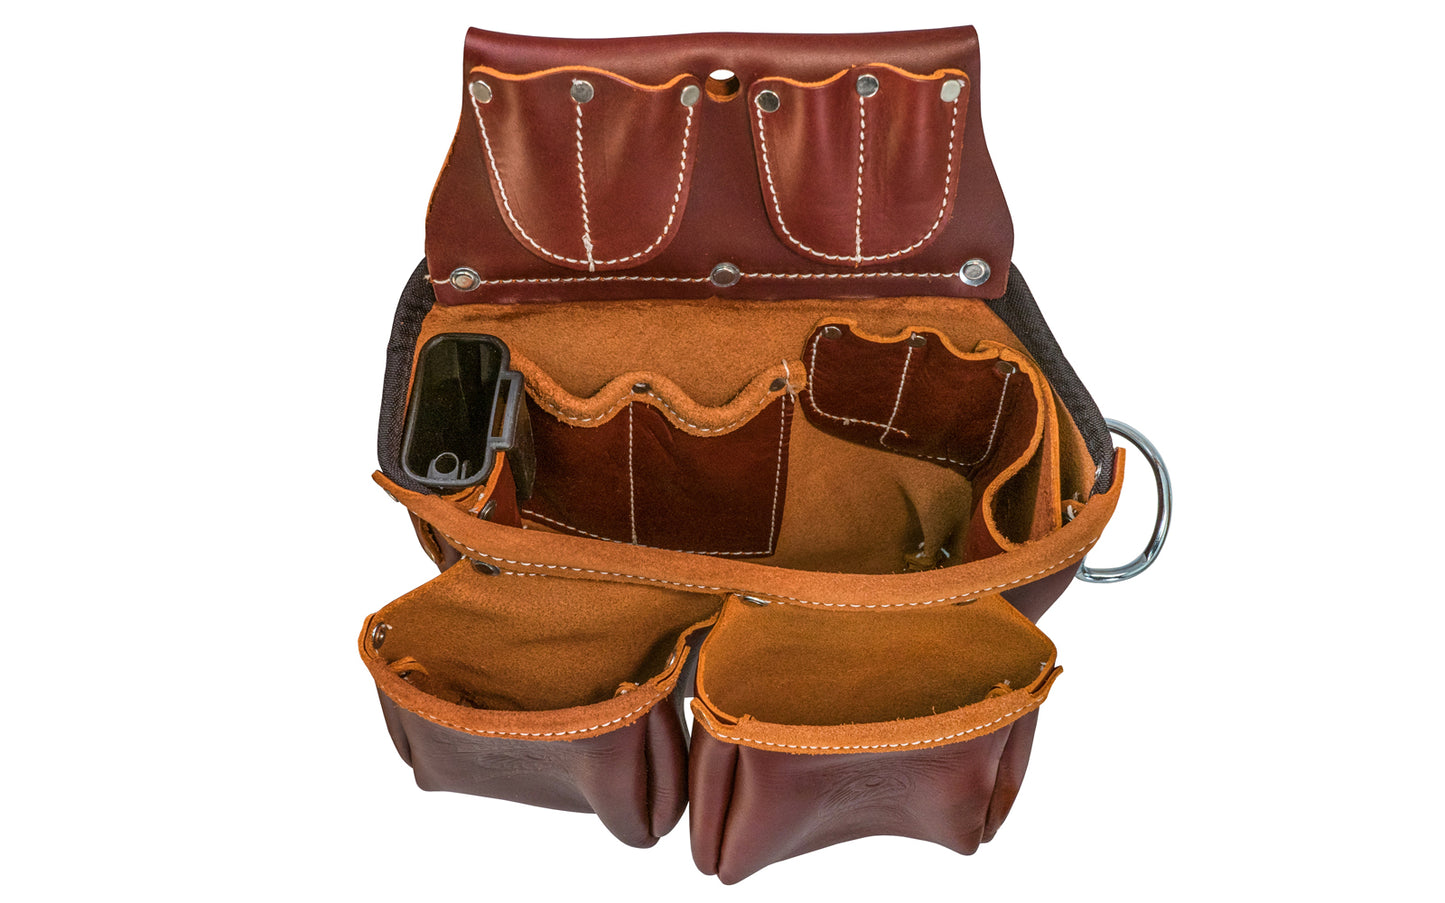 Occidental Leather "Big Oxy" Leather Fastener Bag ~ 5526 - Genuine leather - Made in USA - 759244204209 - Holders for torpedo level, pencils, utility knife, chisels, driver bits, tri-square, cat’s paw, driver bits - 16 holders for pencils, lumber crayon, torpedo level, hammer - Three Pouch Tool Bag - Big Oxy Leather Bag